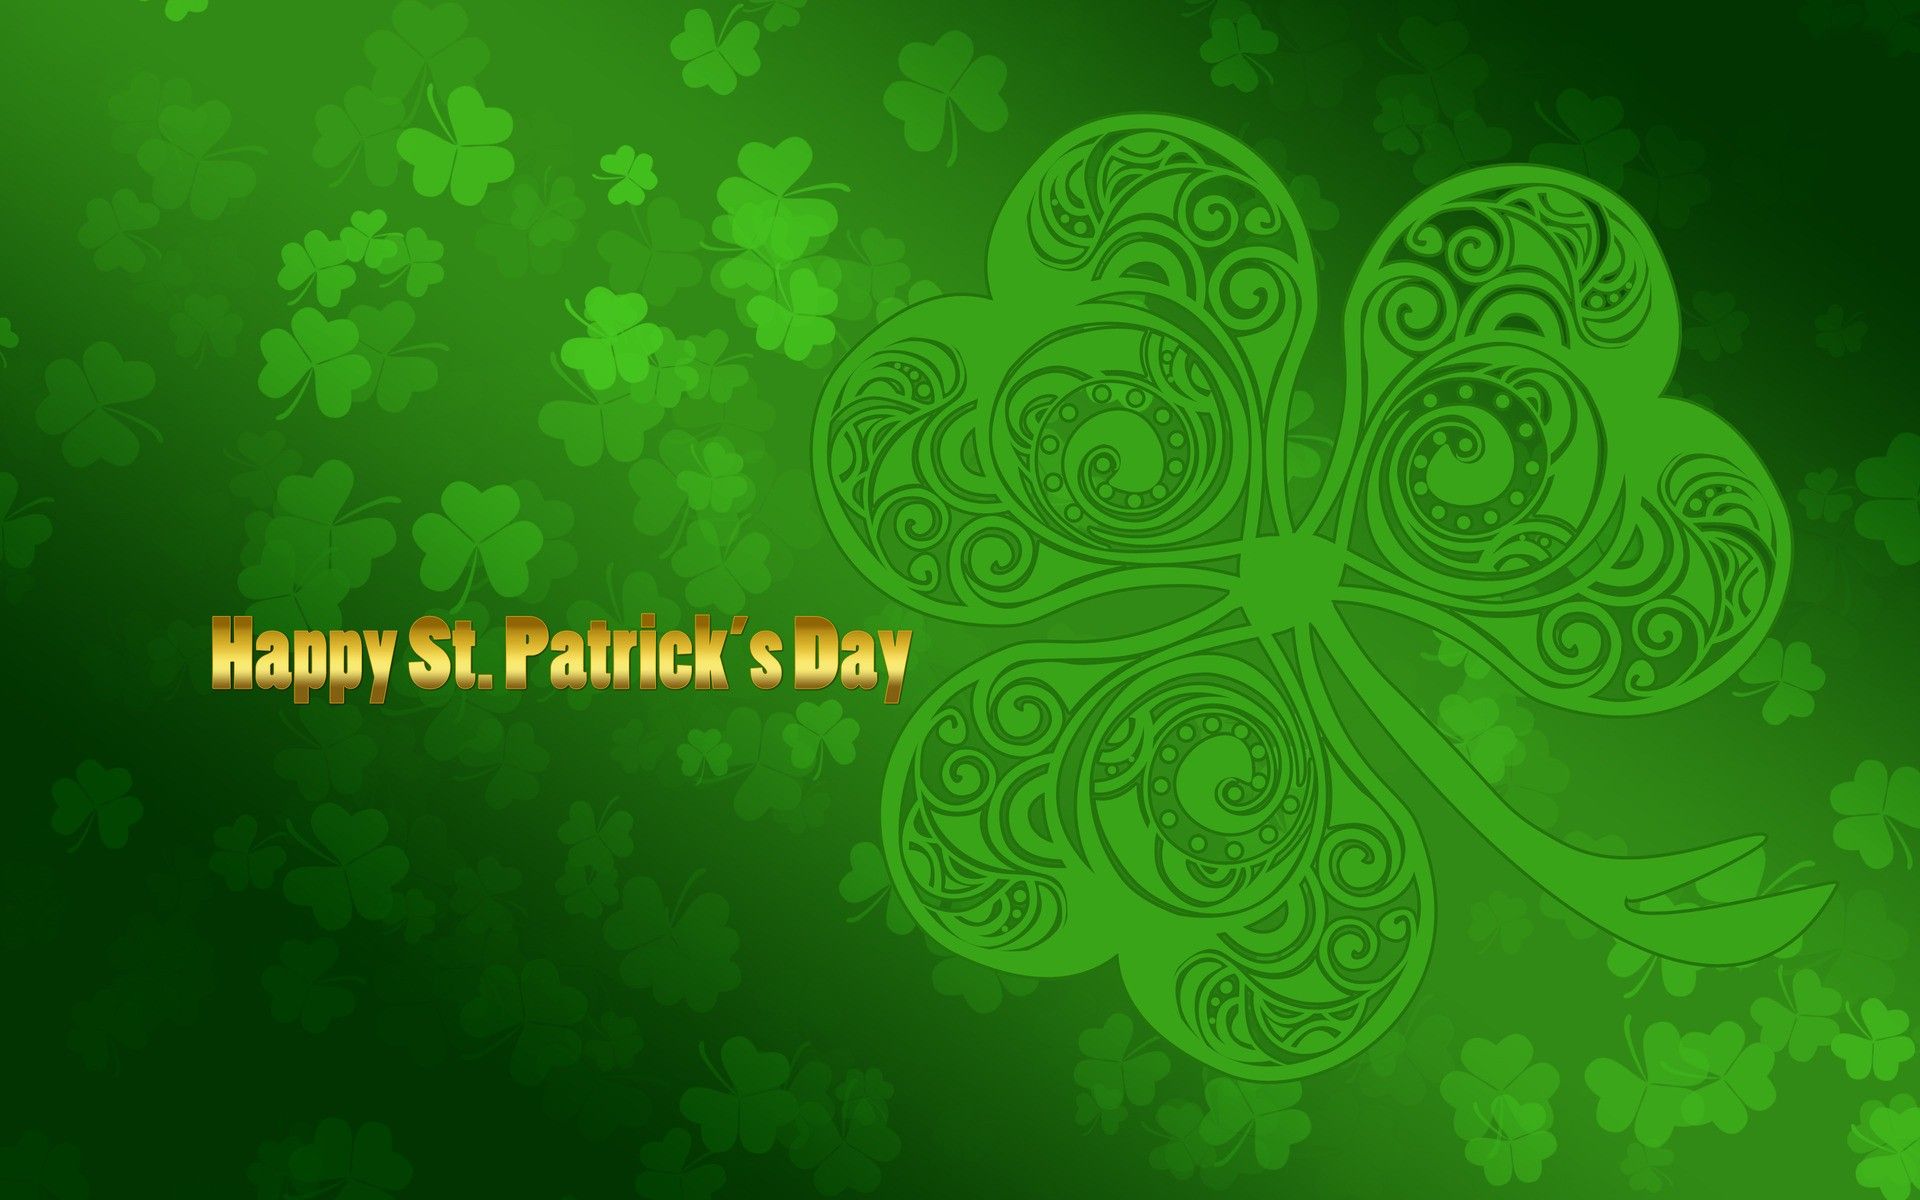 happy st patrick's day wishes pictures | Daily pics update | HD ...